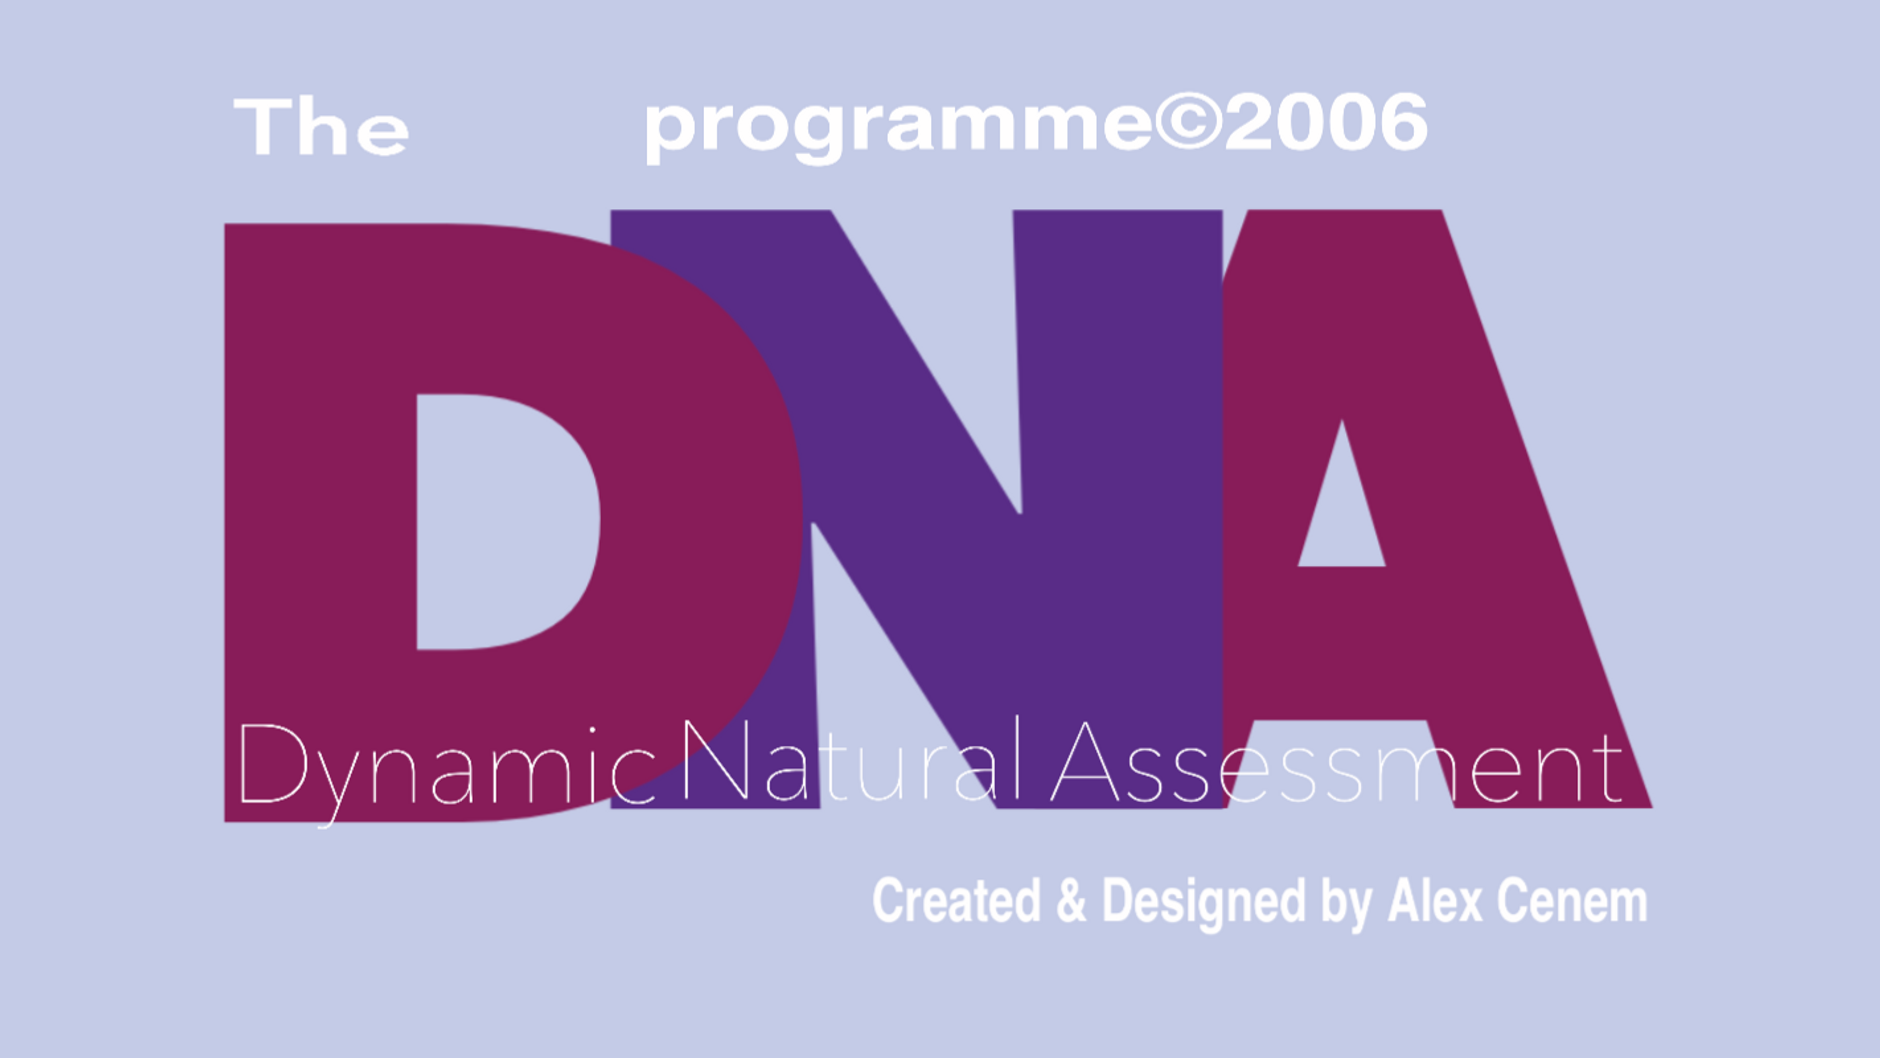 The DNA programme channel